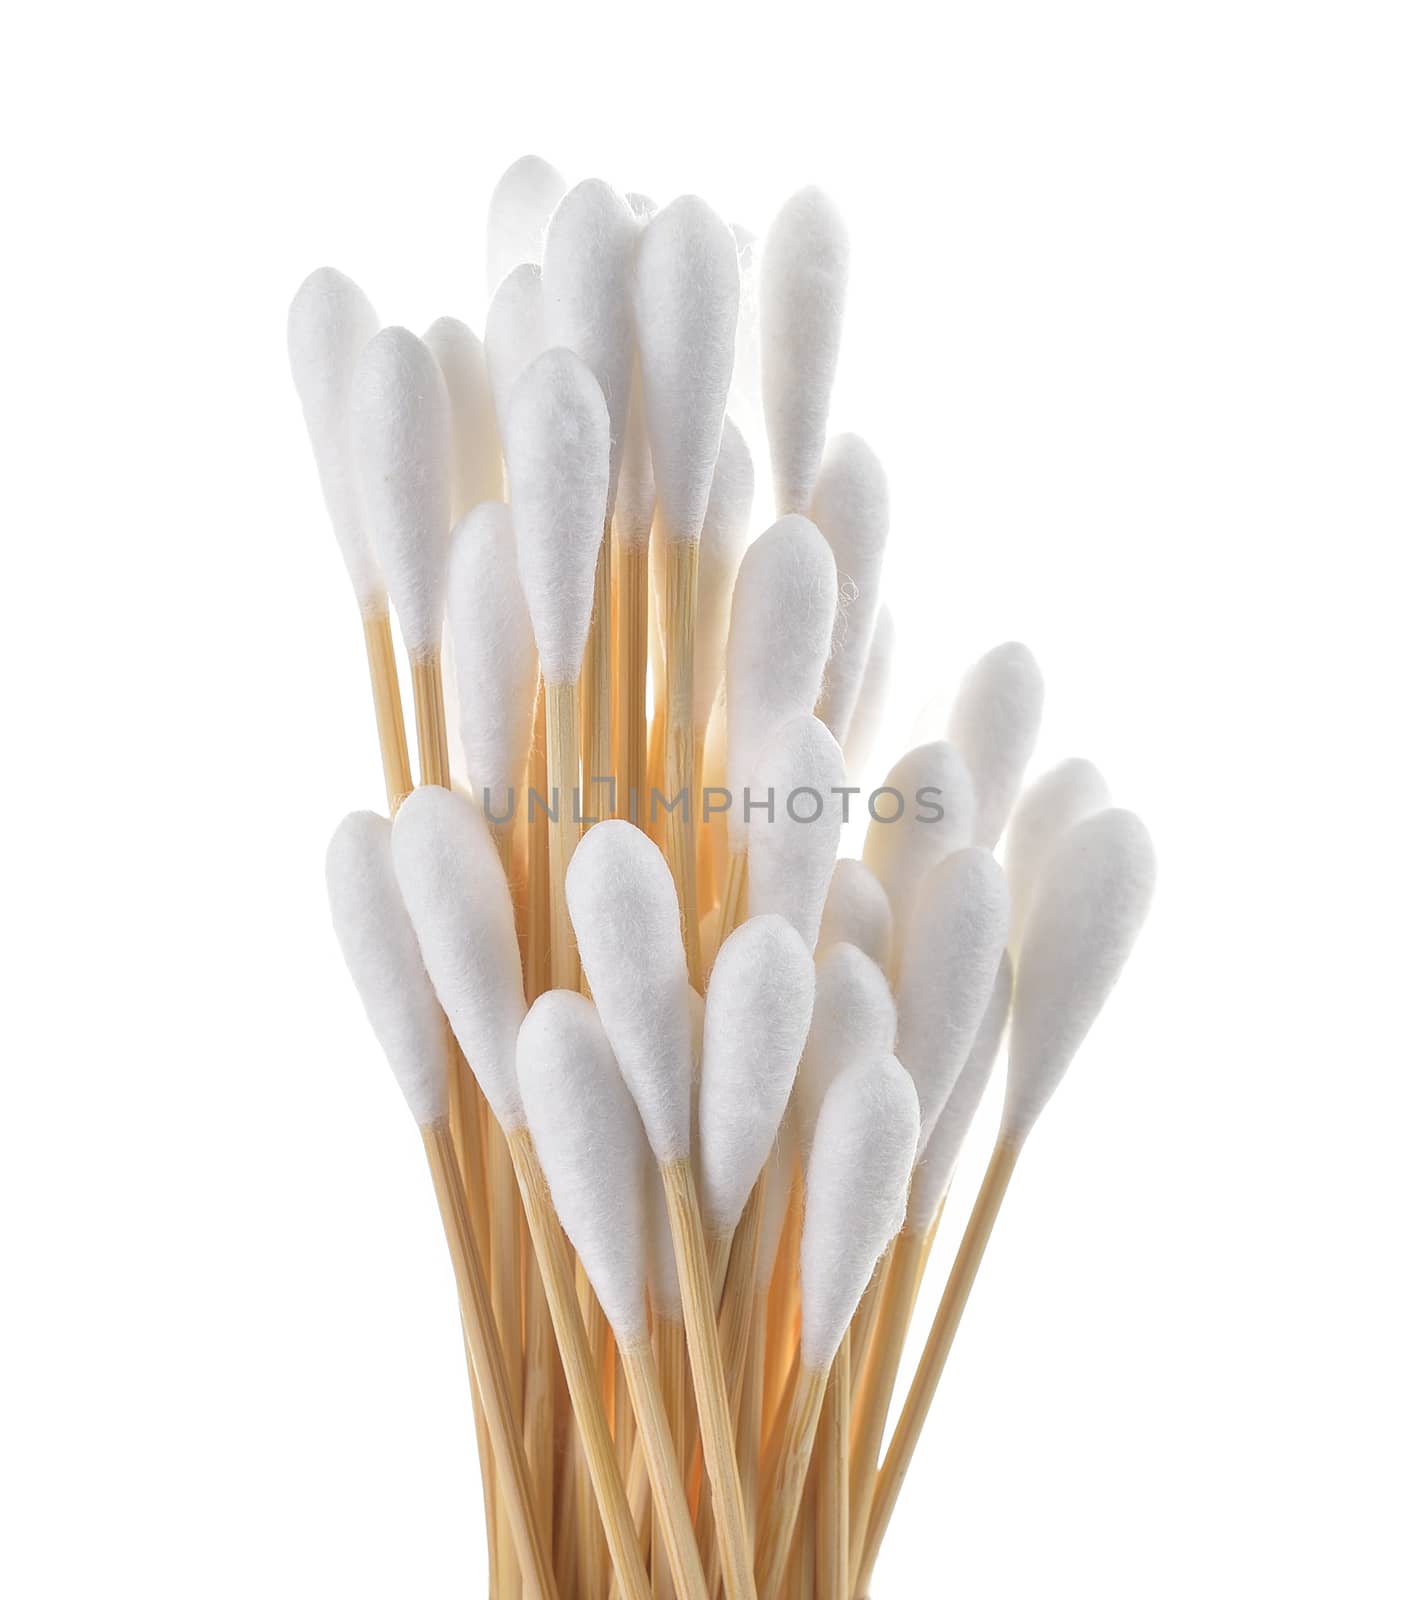 cotton bud on white background by sommai